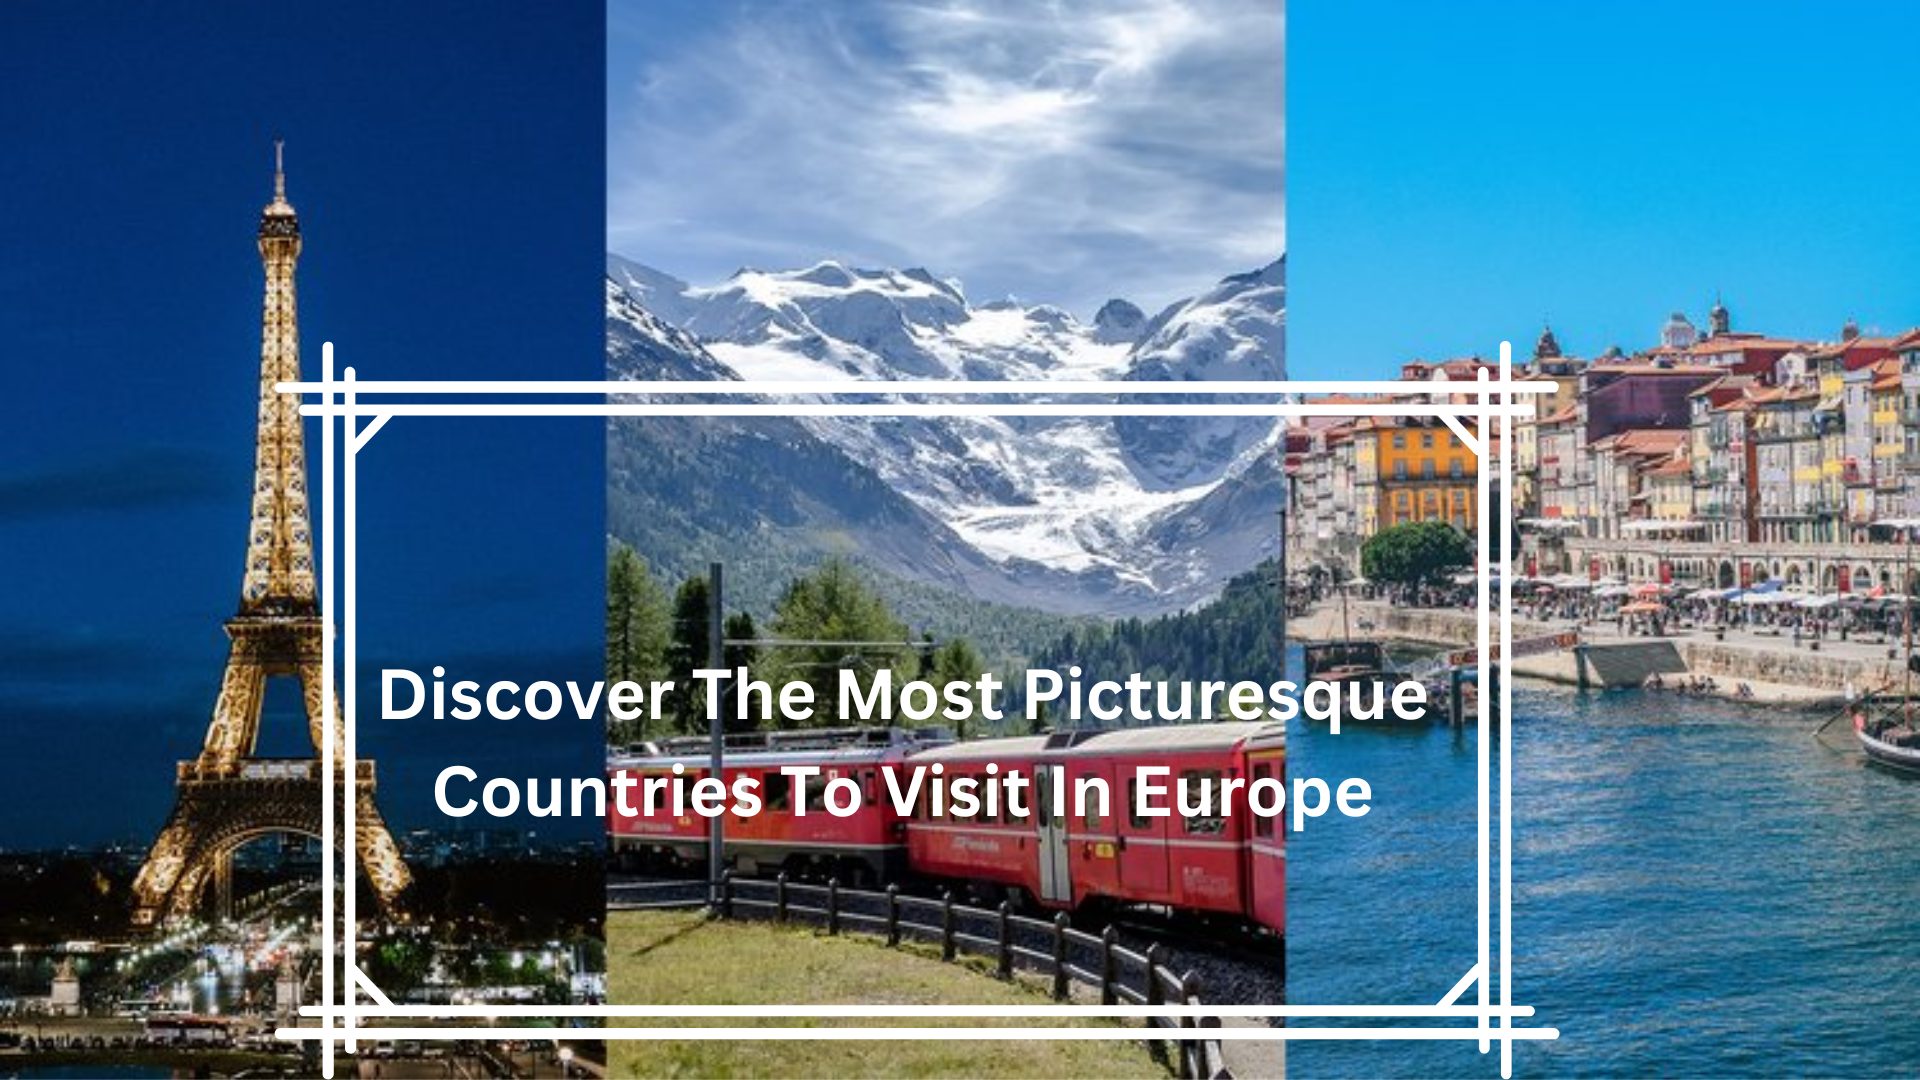 Discover The Most Picturesque Countries To Visit In Europe